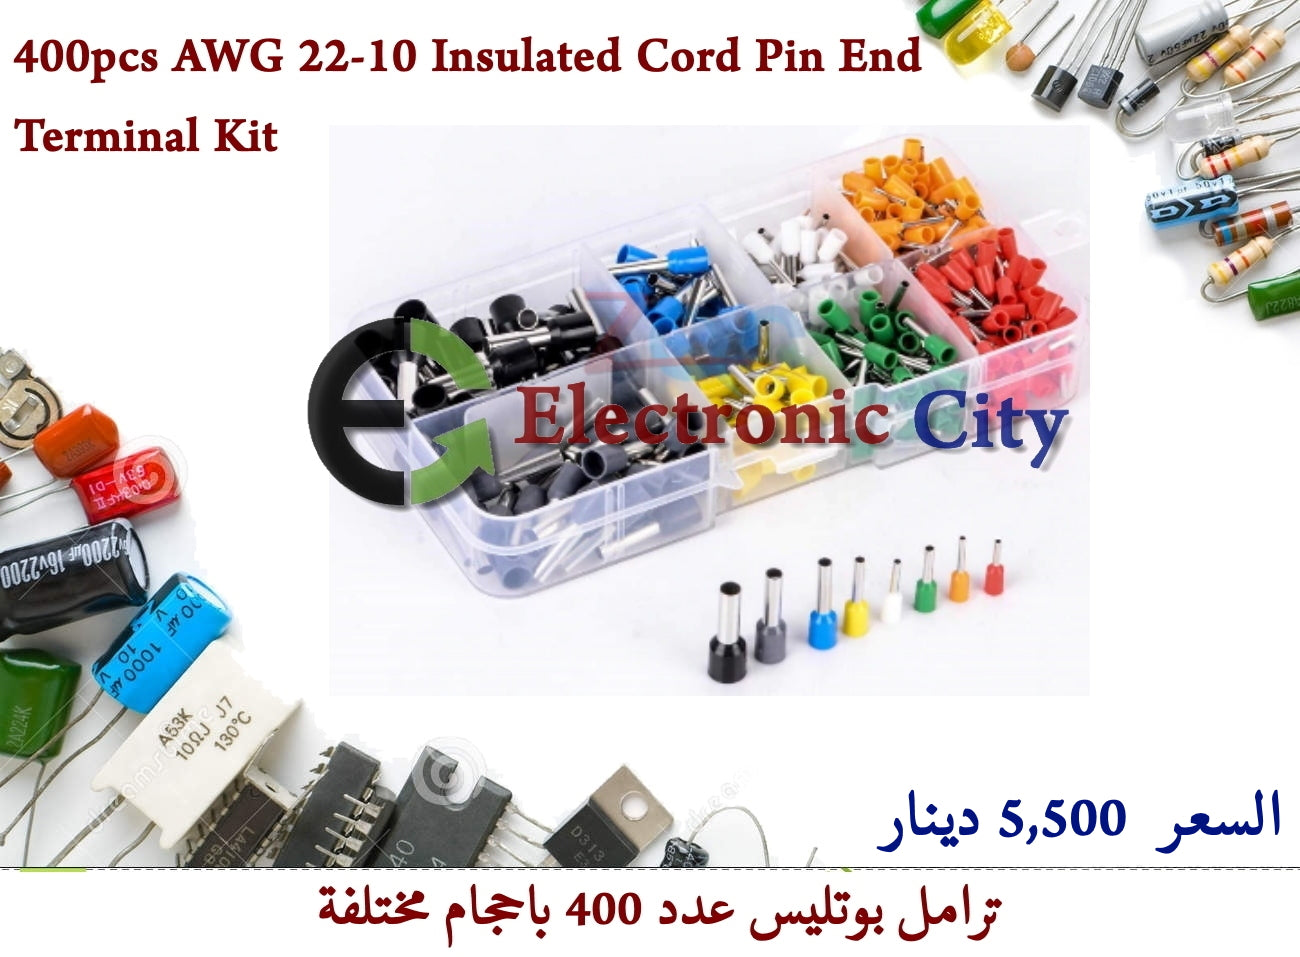 400pcs AWG 22-10 Insulated Cord Pin End Terminal Kit